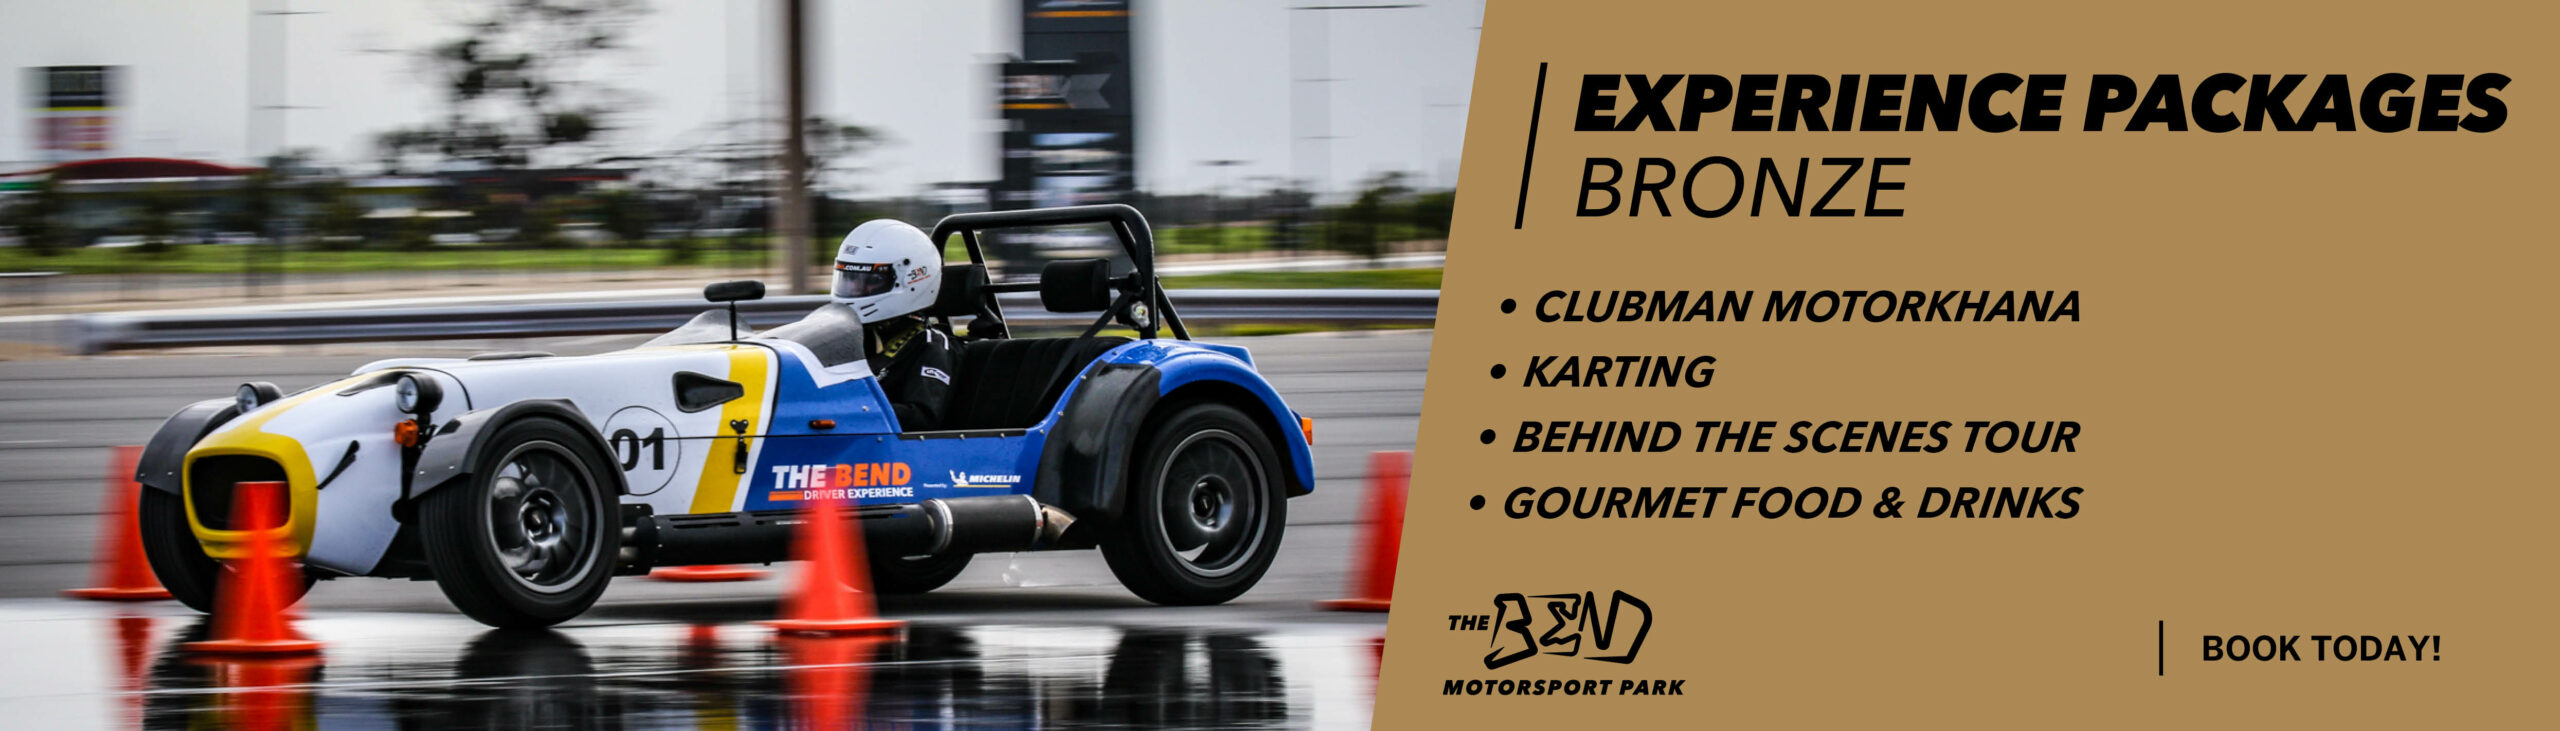 Experience Packages – BRONZE (CLUBMAN)